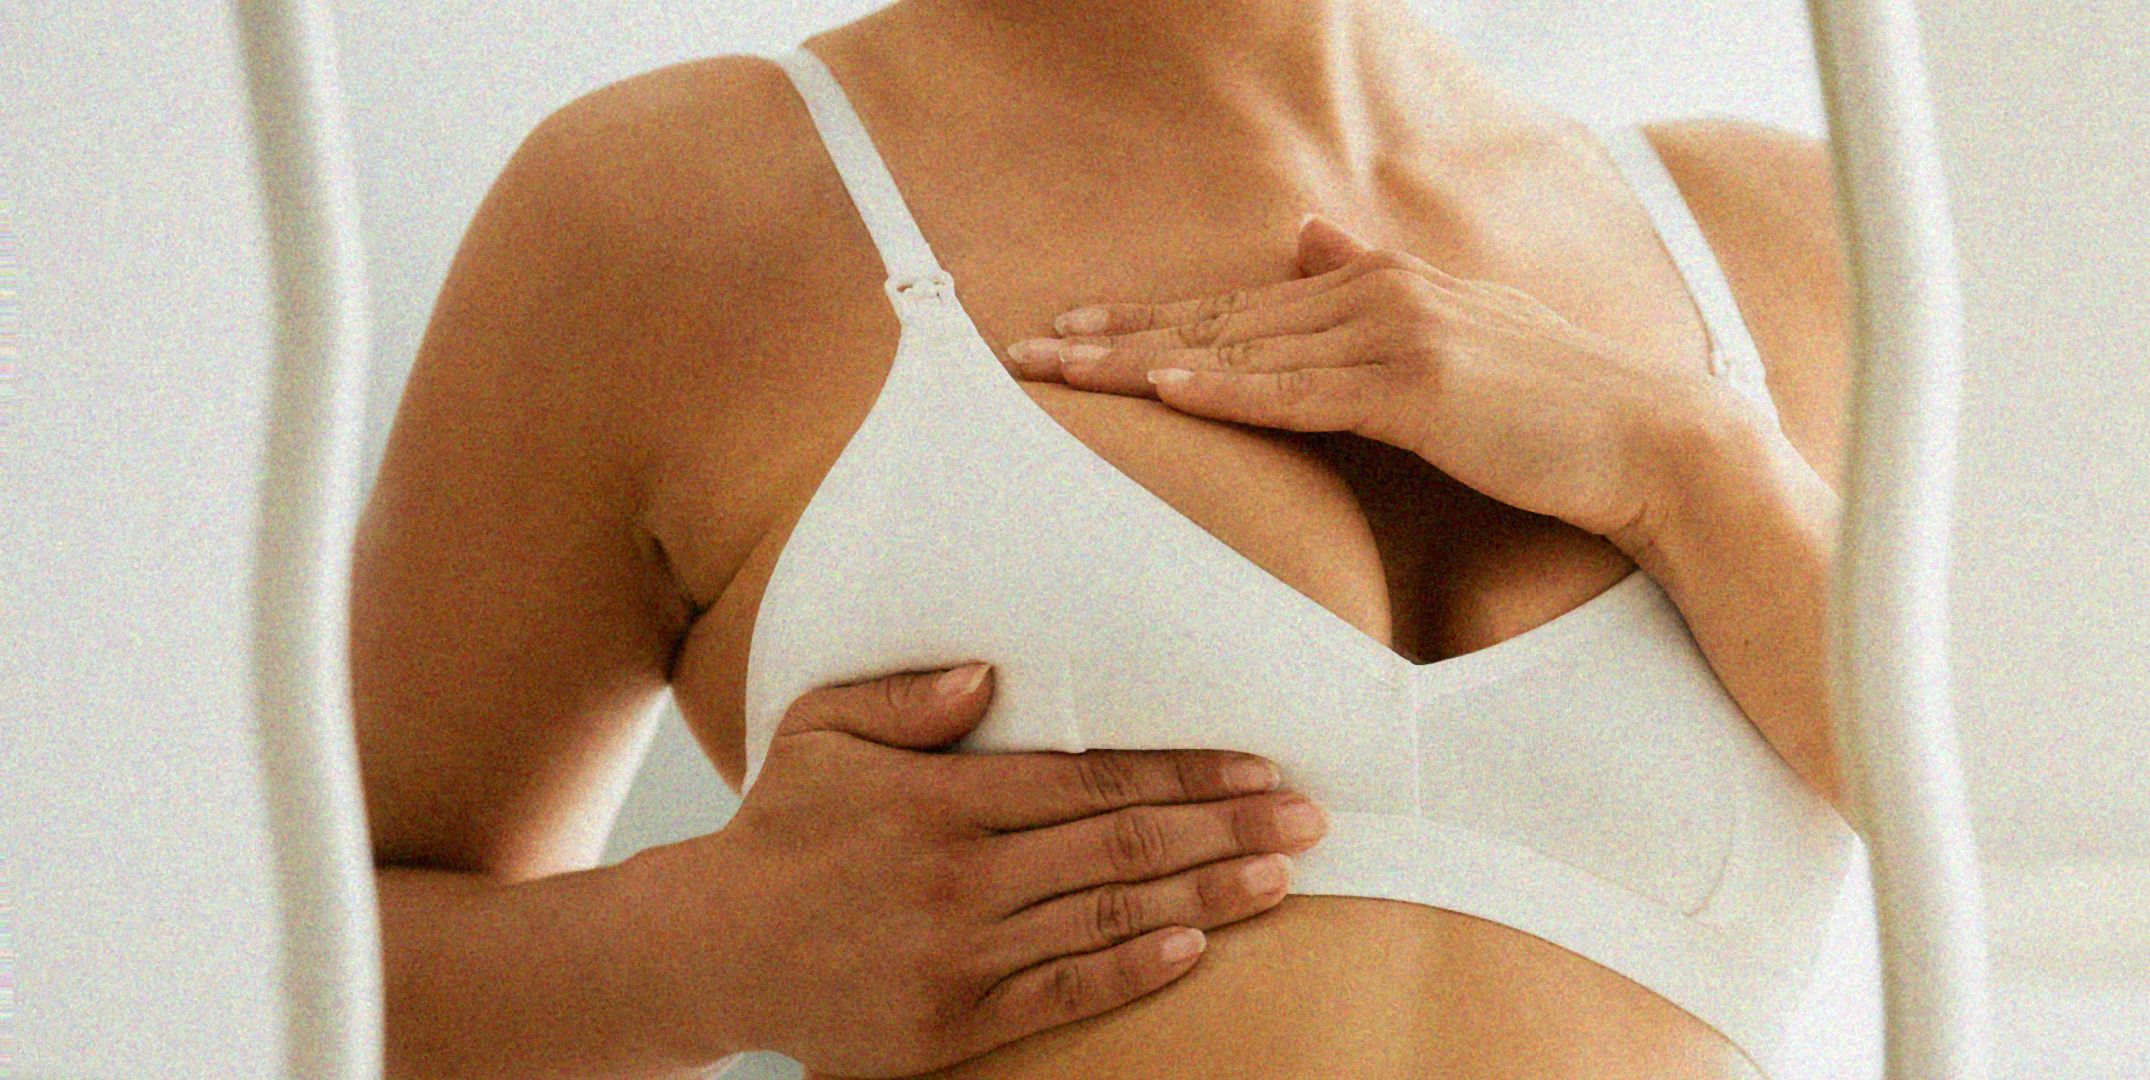 How Love Islanders are being encouraged to check their breasts